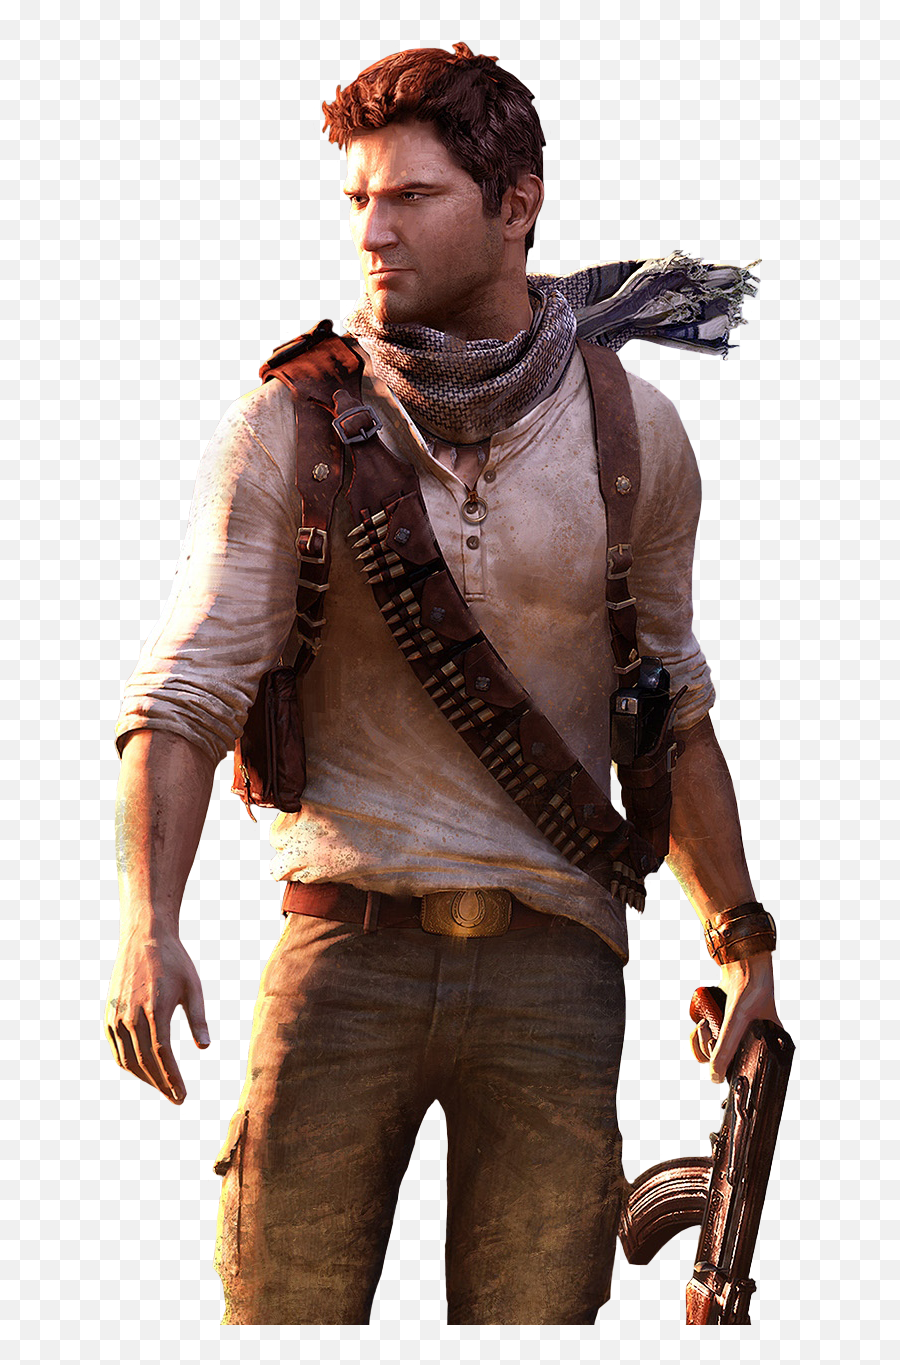 Download Png Image - Uncharted 3 Deception,Uncharted 4 Png